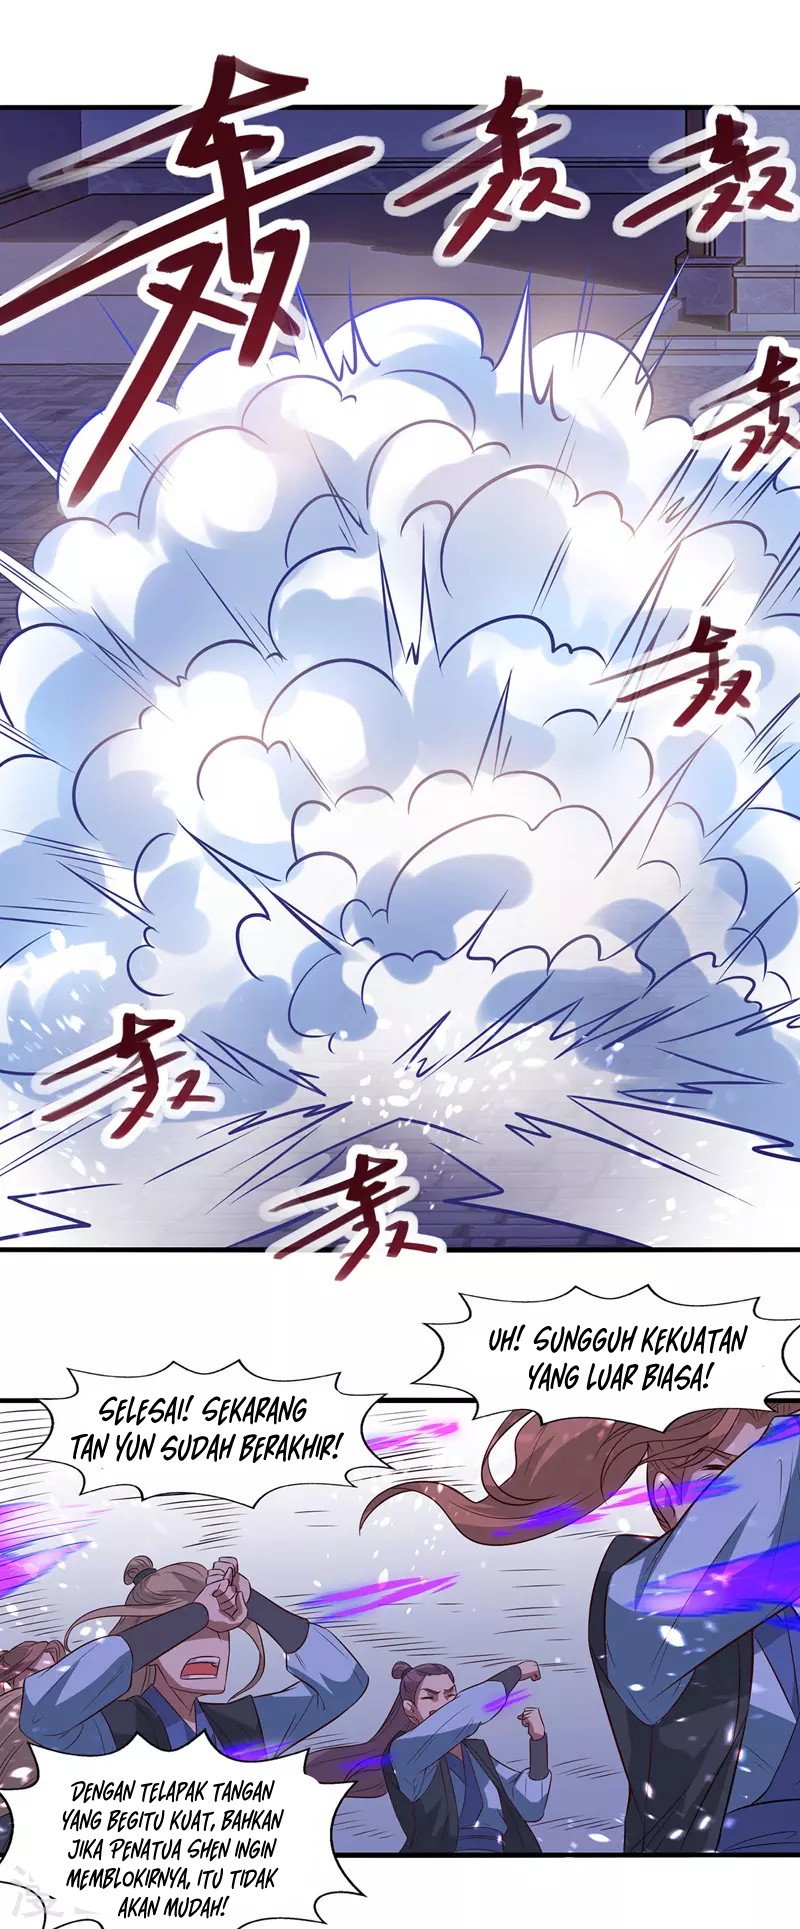 Against The Heaven Supreme (Heaven Guards) Chapter 36 - 101